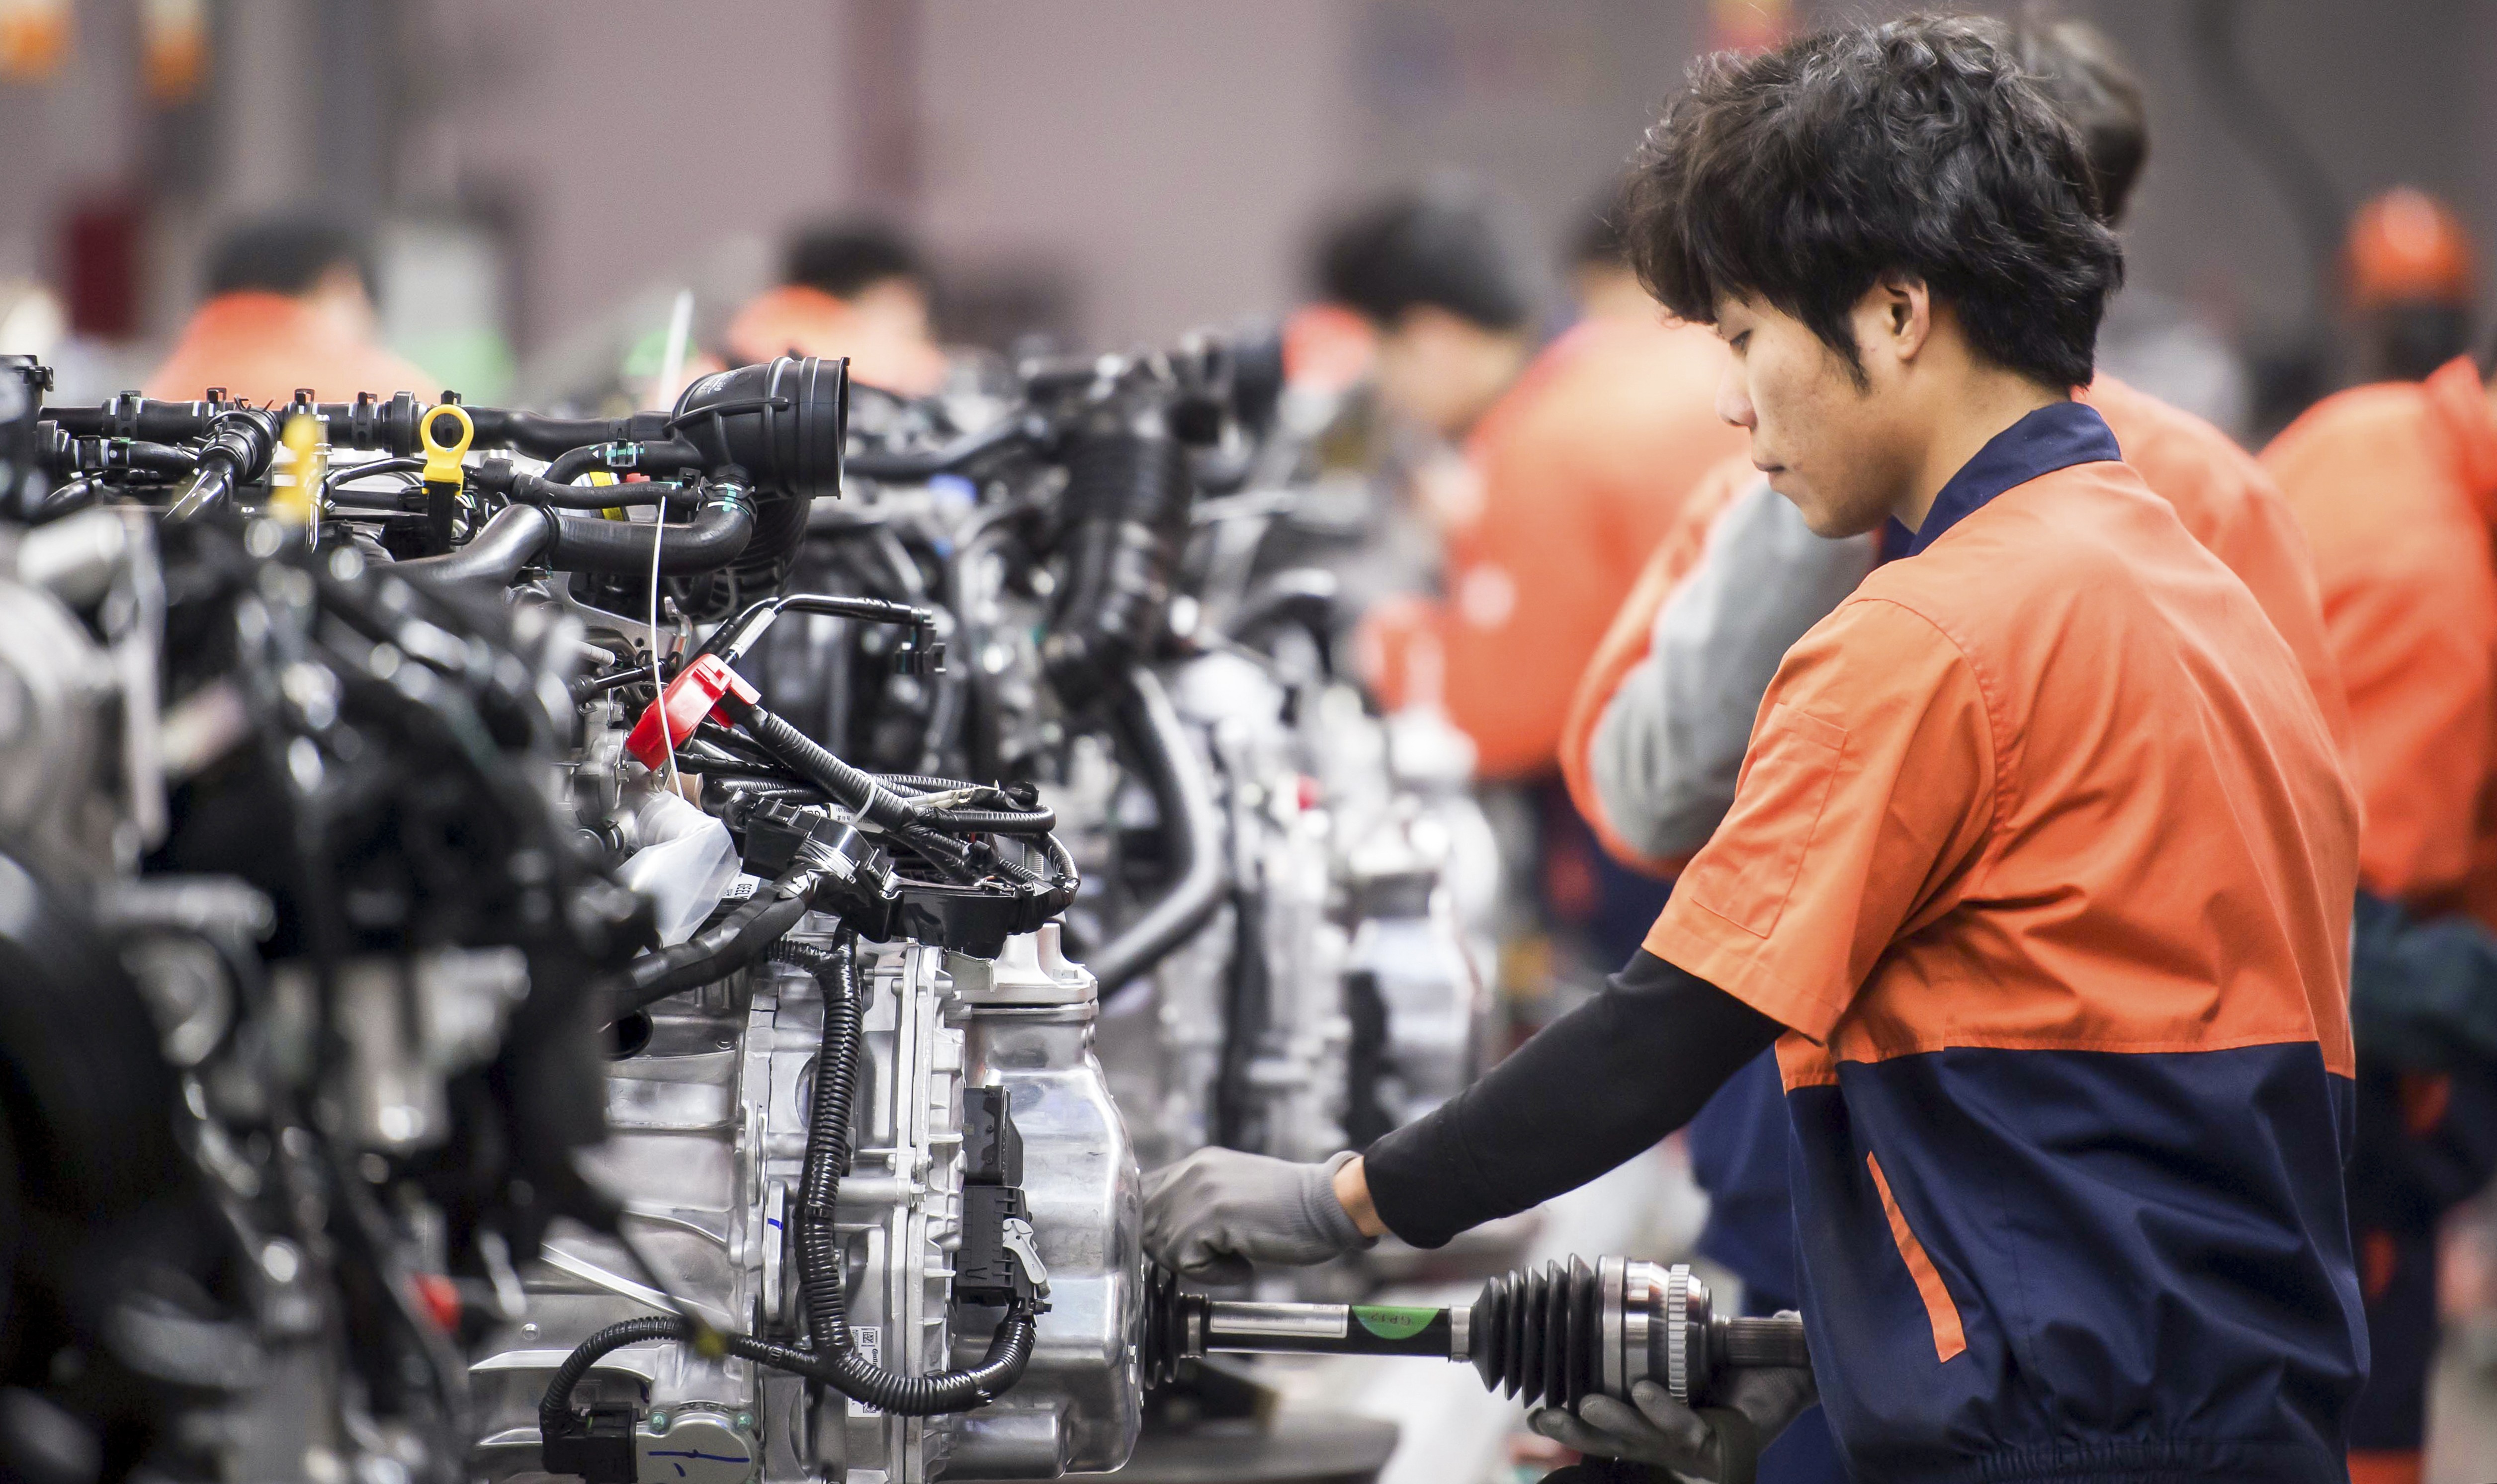 Workers assemble engines at a Geely Automobile Manufacturing Plant in Zhejiang province in March 2017. The Made in China plan aims to accelerate innovation and upgrade the quality of manufacturing in the country. Photo: Shutterstock